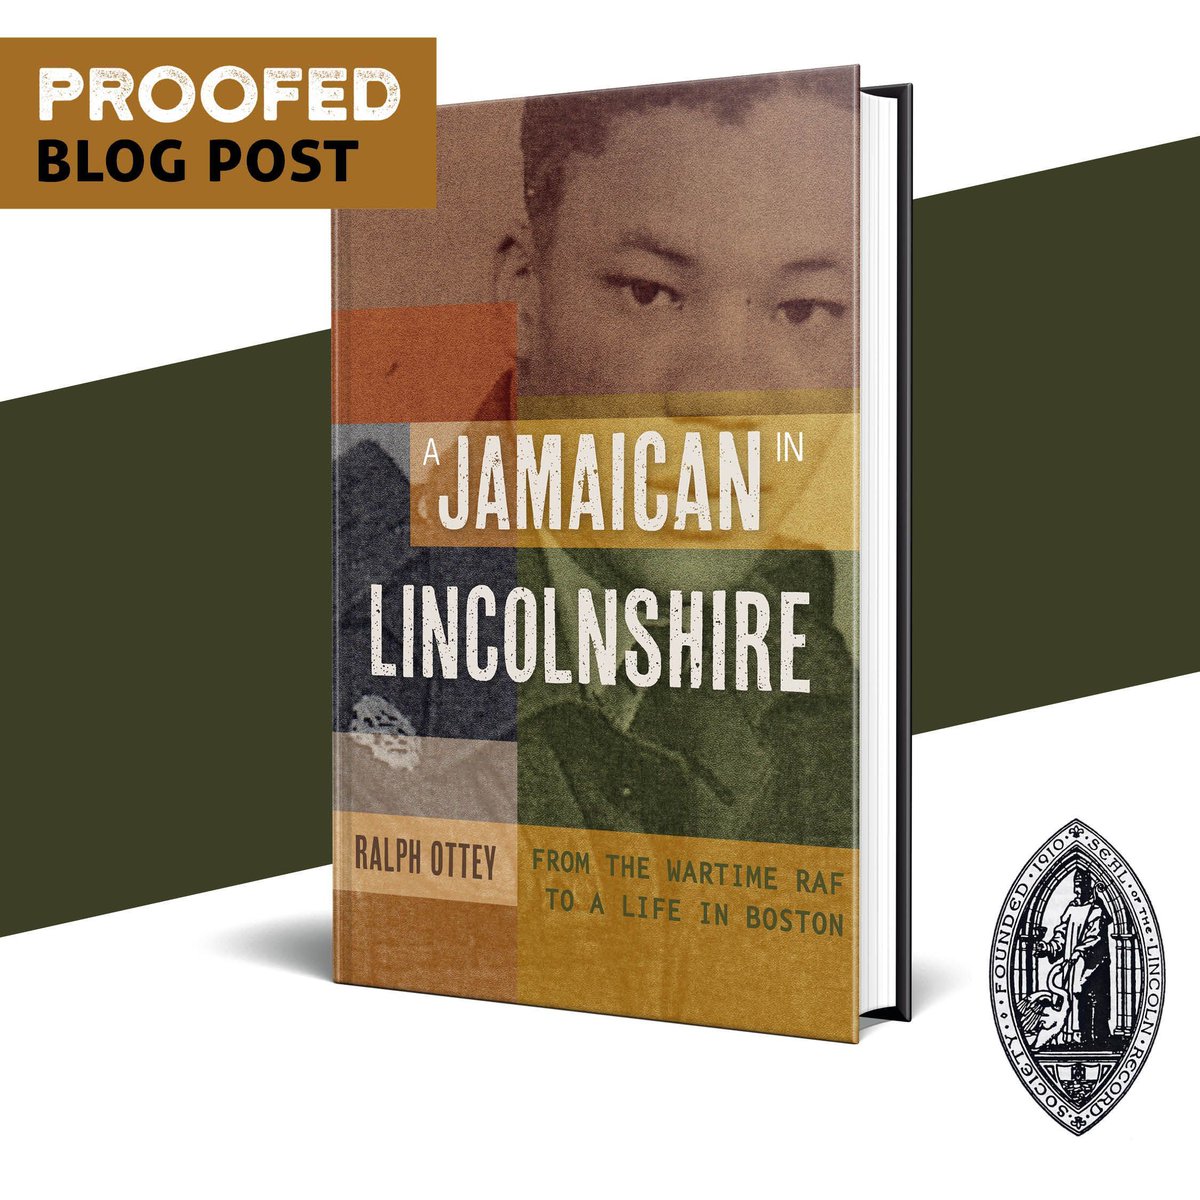 Our latest blog post features an excerpt from the author of 'A Jamaican in Lincolnshire', Ralph Ottey's memoir, which details his experience in the RAF and finding a job in Boston Lincolnshire. Check it out here: buff.ly/4bbg6iz #ProofedBlog #BritishLocalHistory